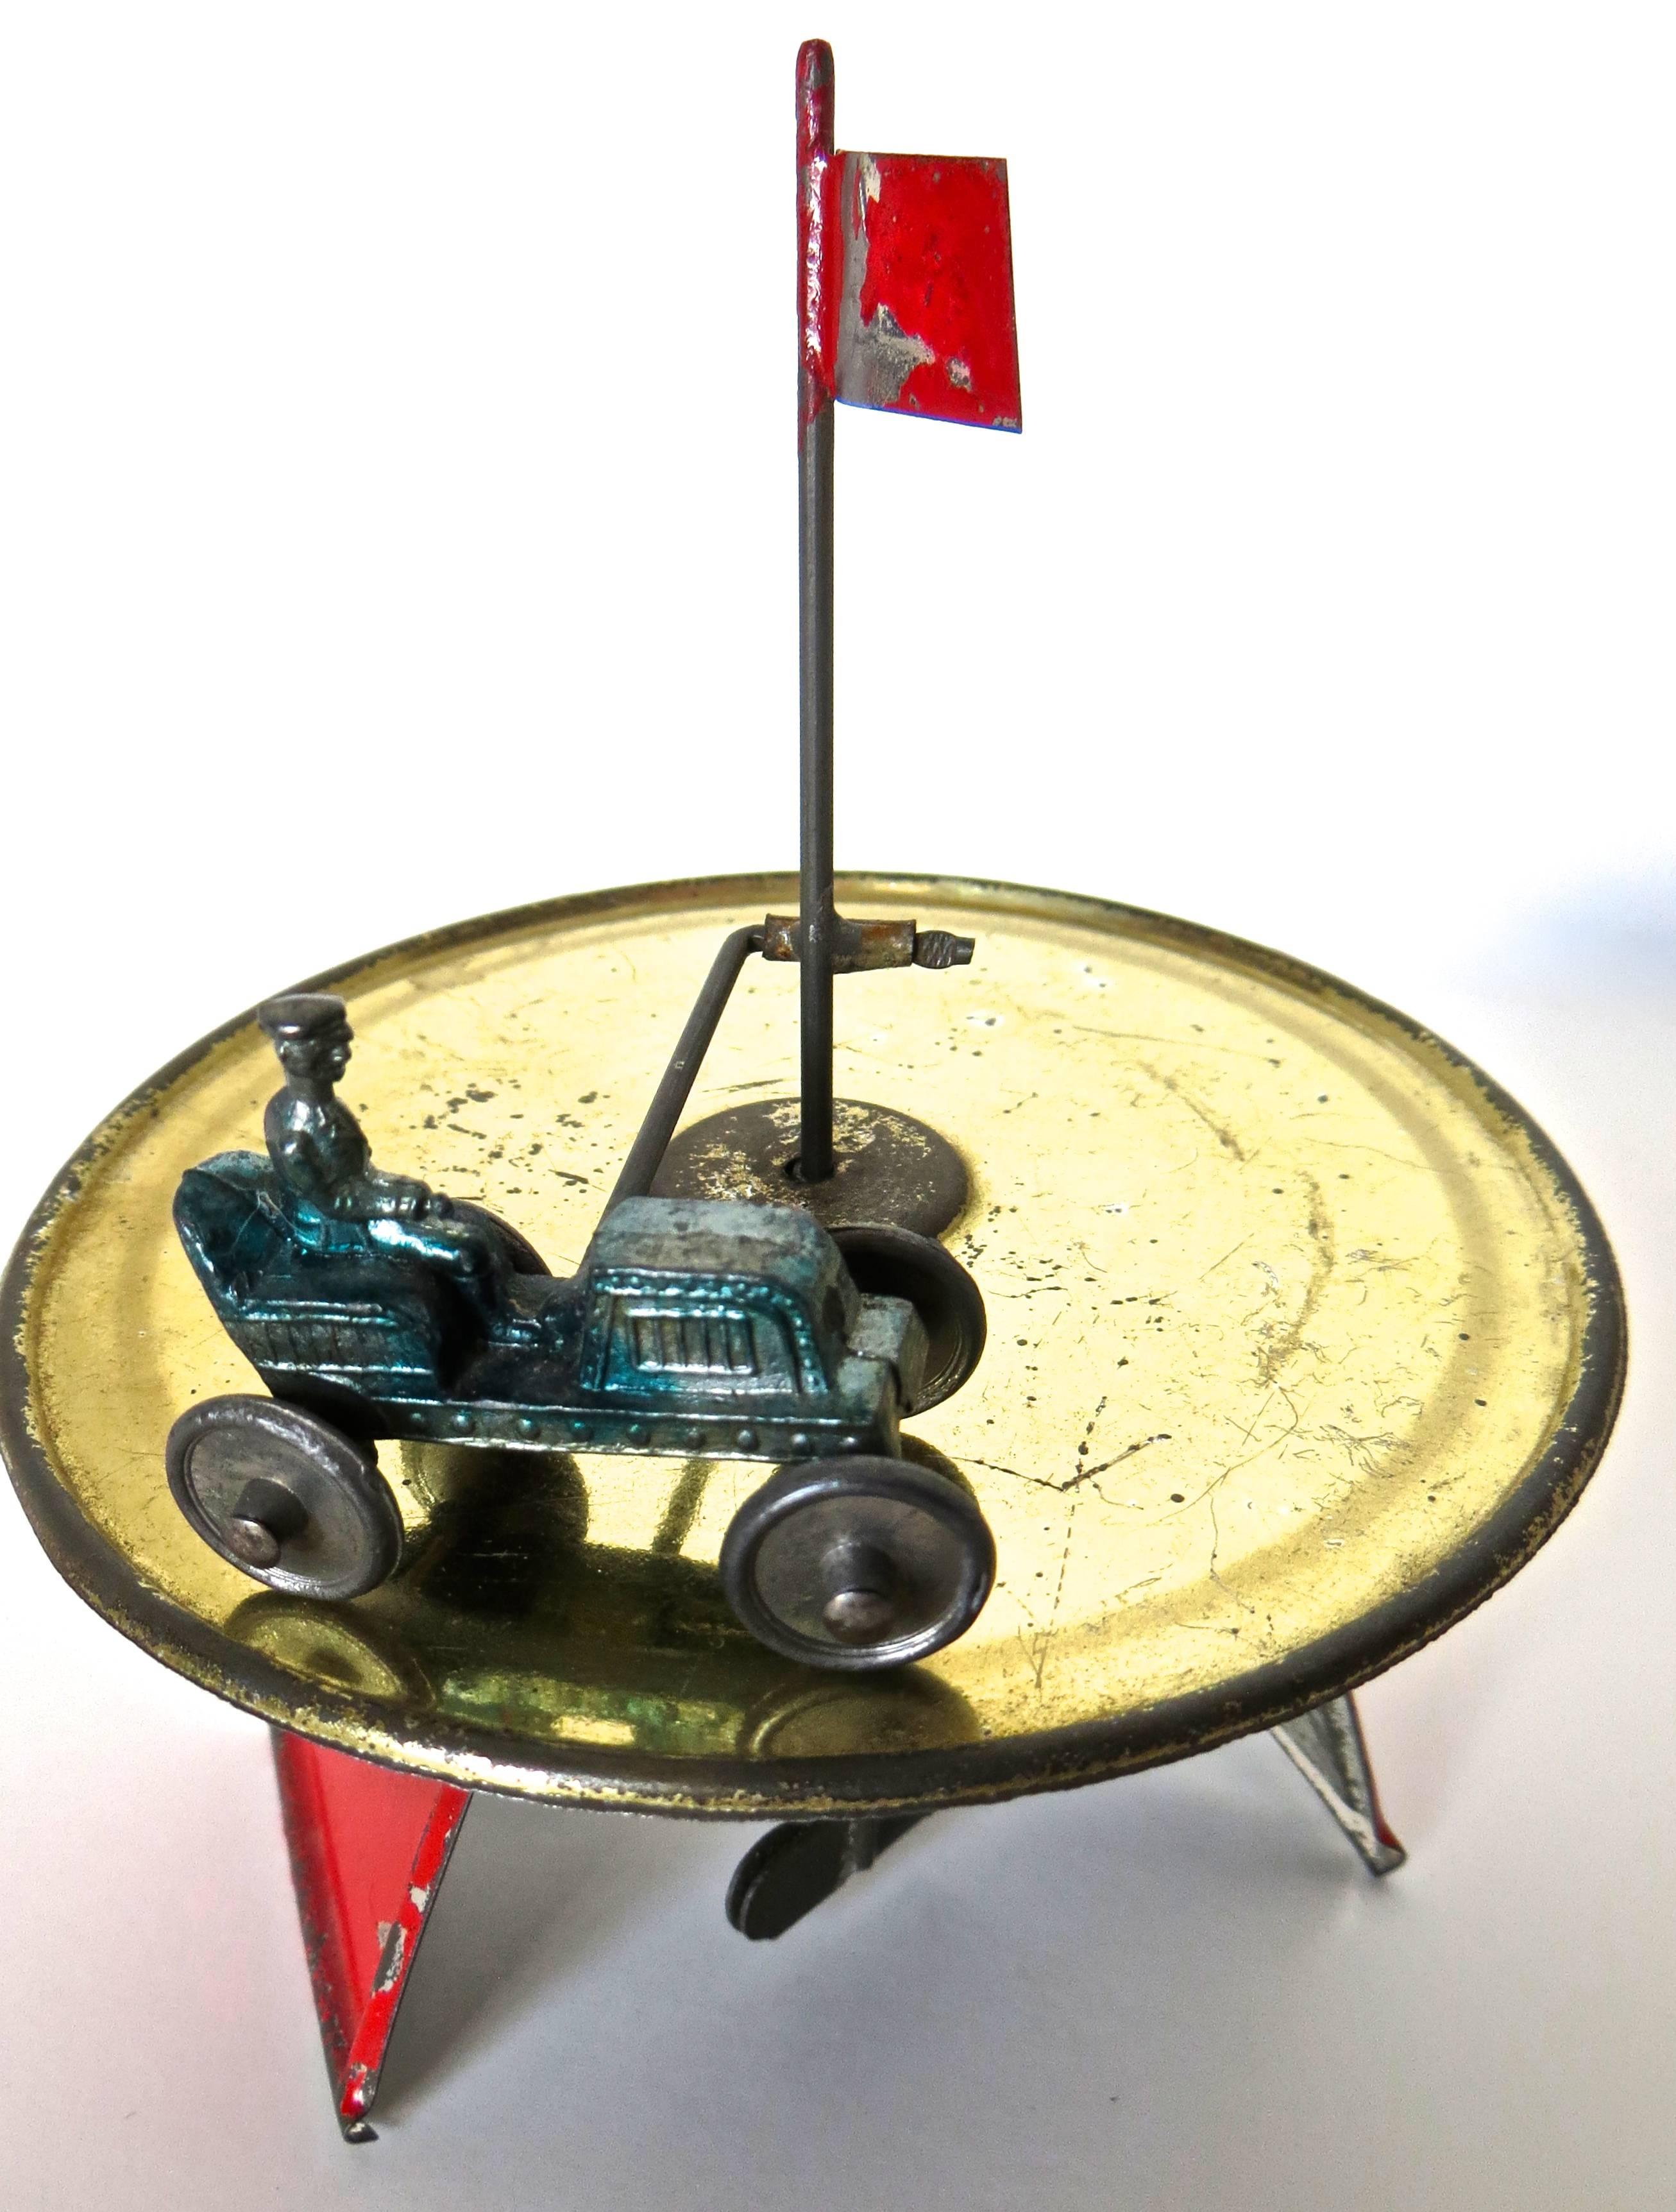 Upon winding up the mechanism underneath at the bottom of the toy, the old car will race around the track, as the circular sphere undulates, encouraging the car to continue. The toy is in remarkably excellent all original condition and paint,